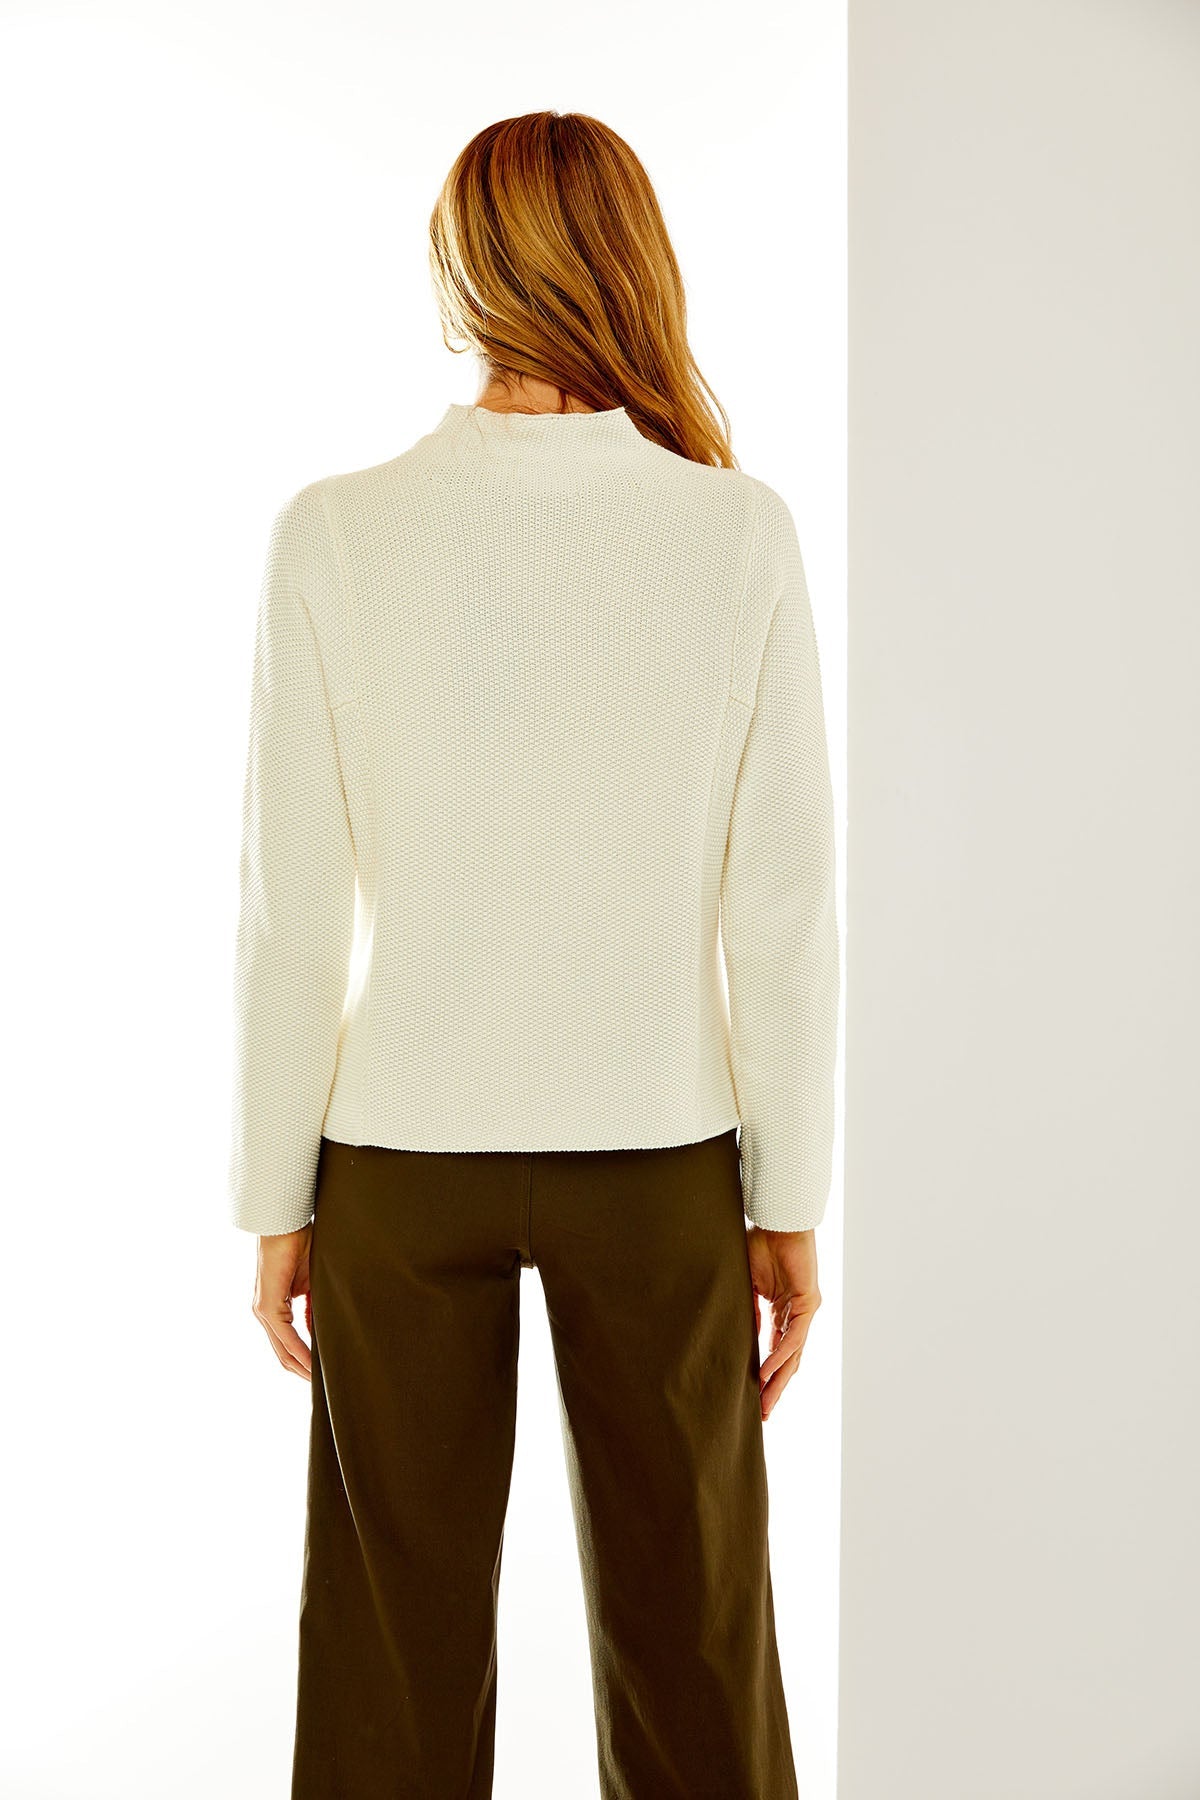 Woman in off-white sweater